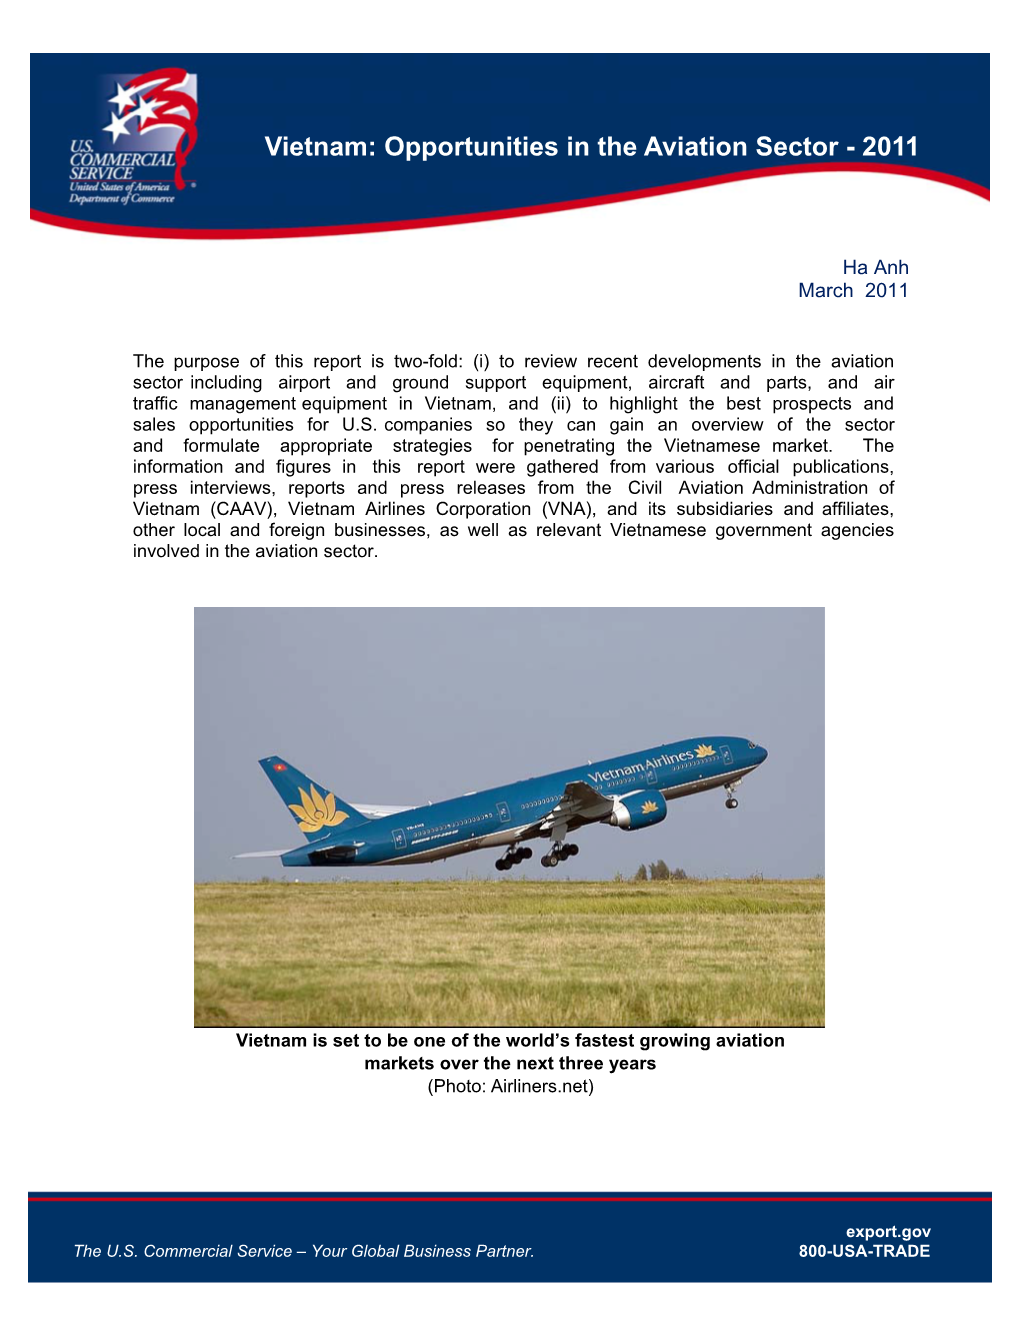 Vietnam: Opportunities in Aviation Sector 2011 Page 1 of 13